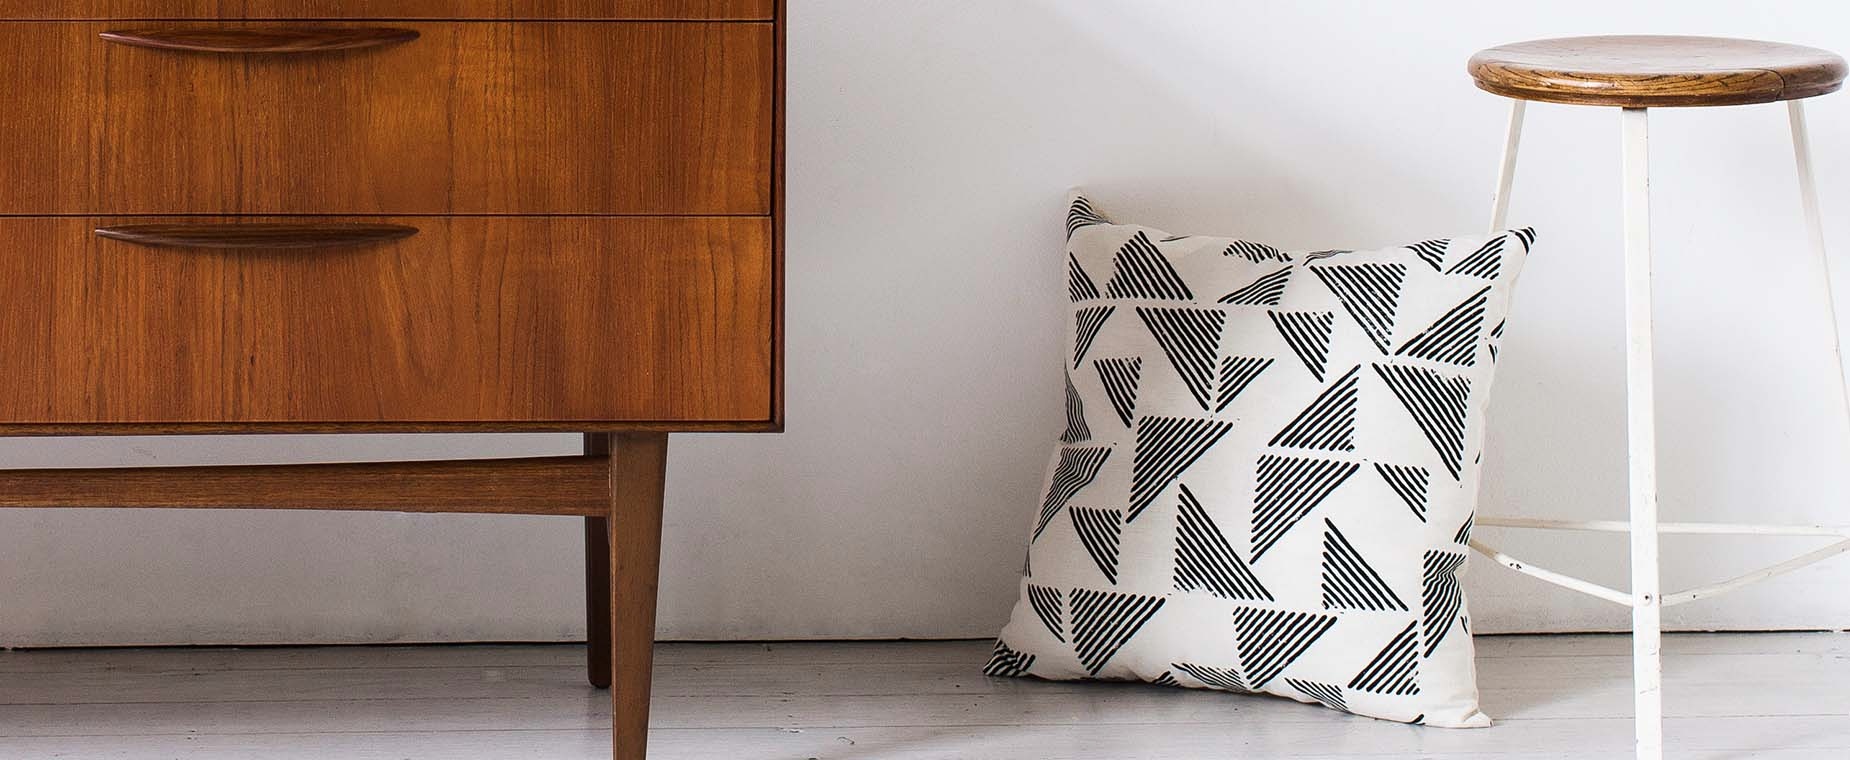 Ink & Spindle 'Blockprint' fabric cushion in Black on Cream basecloth.